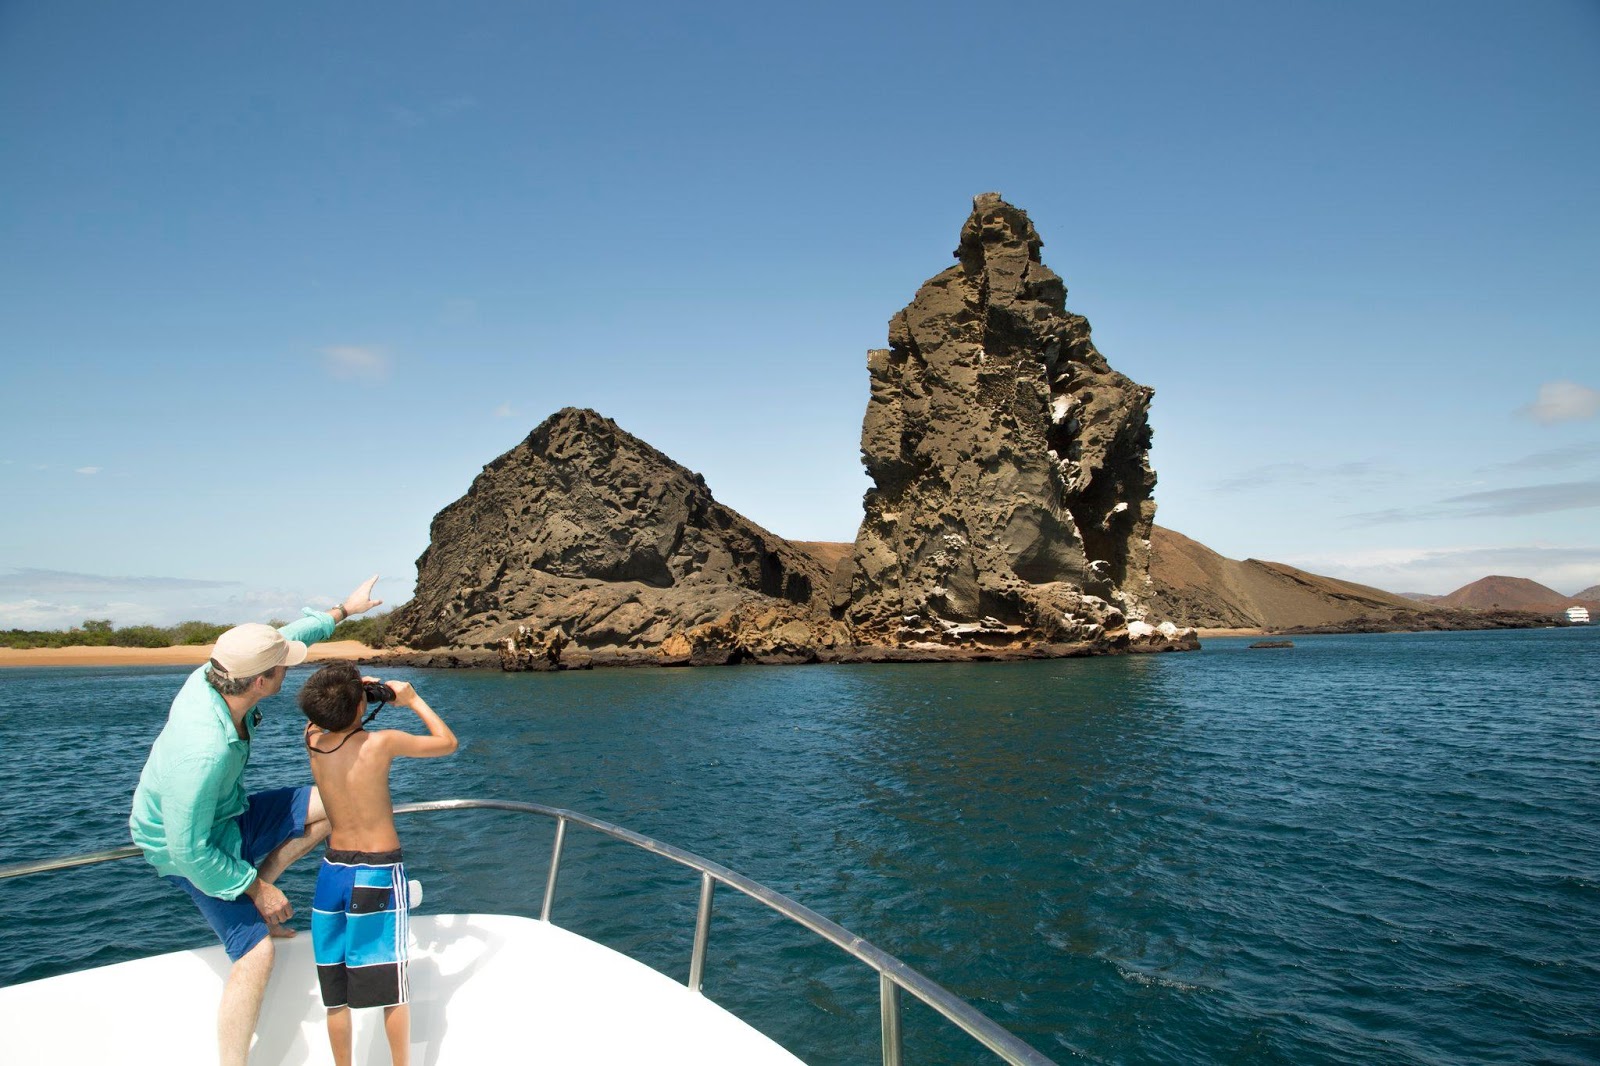 Trans World Travel: Galapagos Islands: Best Time to Go, How to Get There and Where to Stay